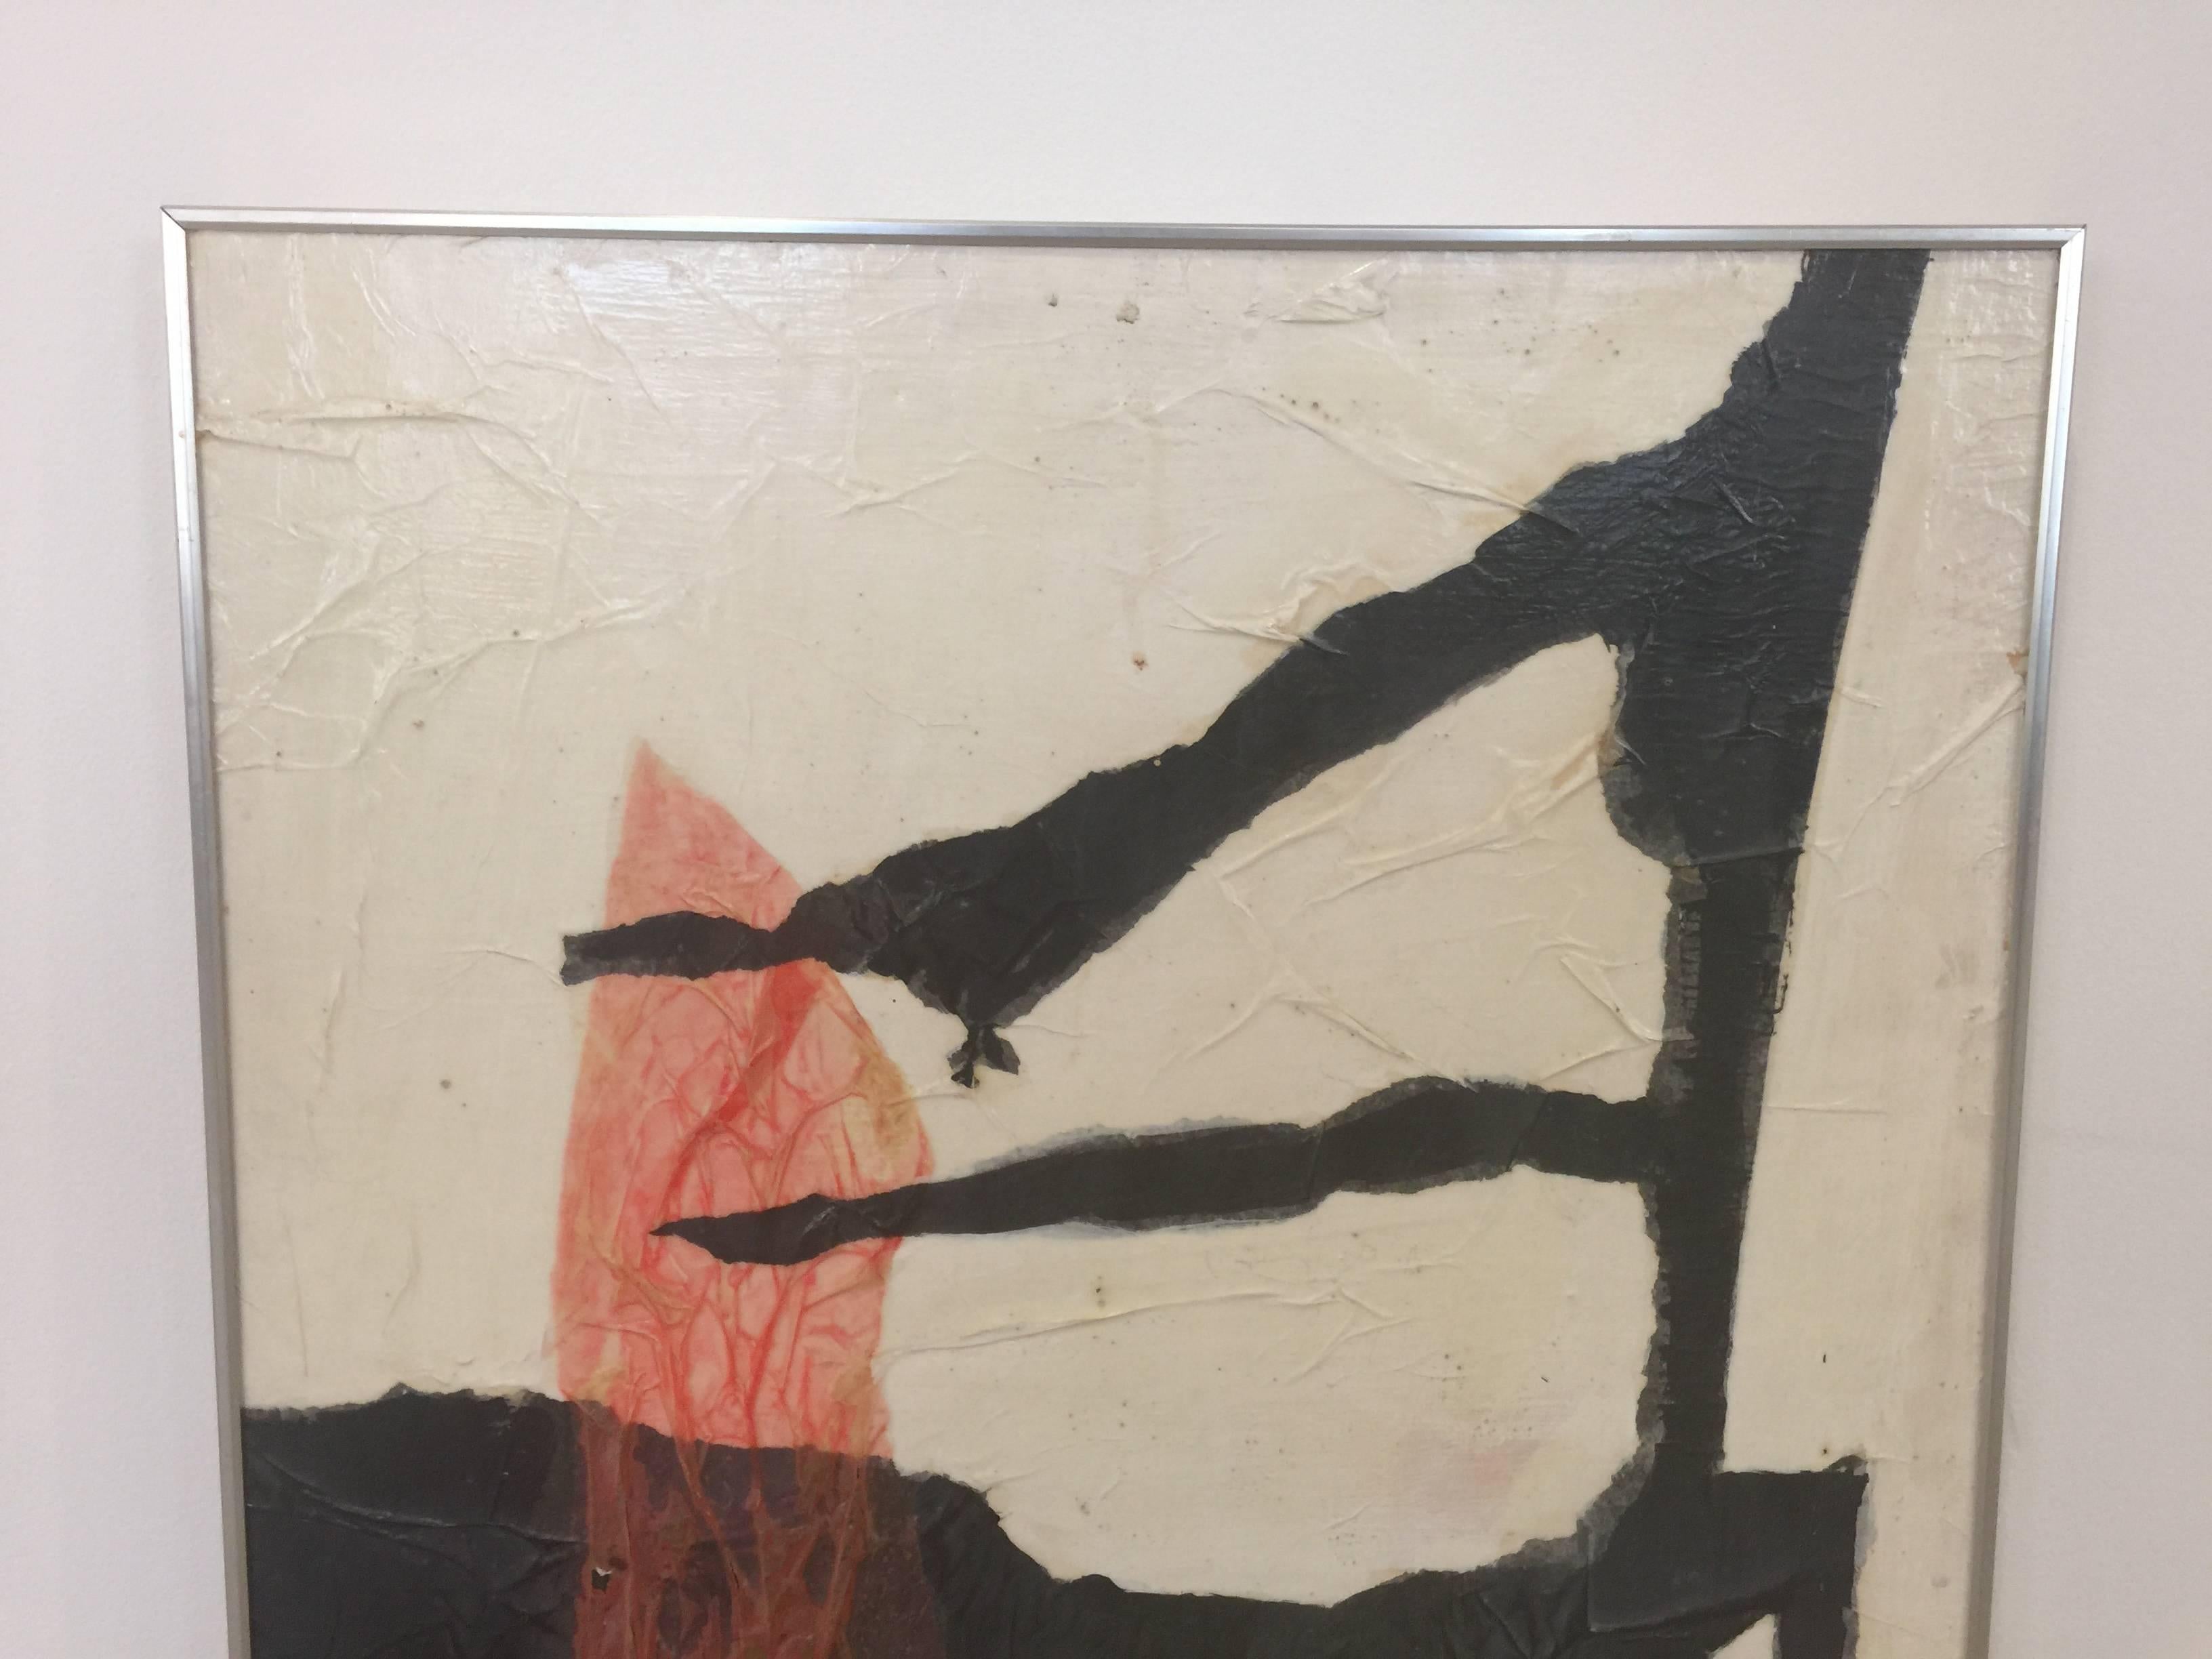 Mixed-media collage on panel painting by Ann Purcell (b. 1941). Untitled. Signed/Dated 1969. Black and coral against white. 
Provenance: Acquired from U.S. collector. Original metal frame.

Artist bio by Paul Behnke:
Ann Purcell is a nationally